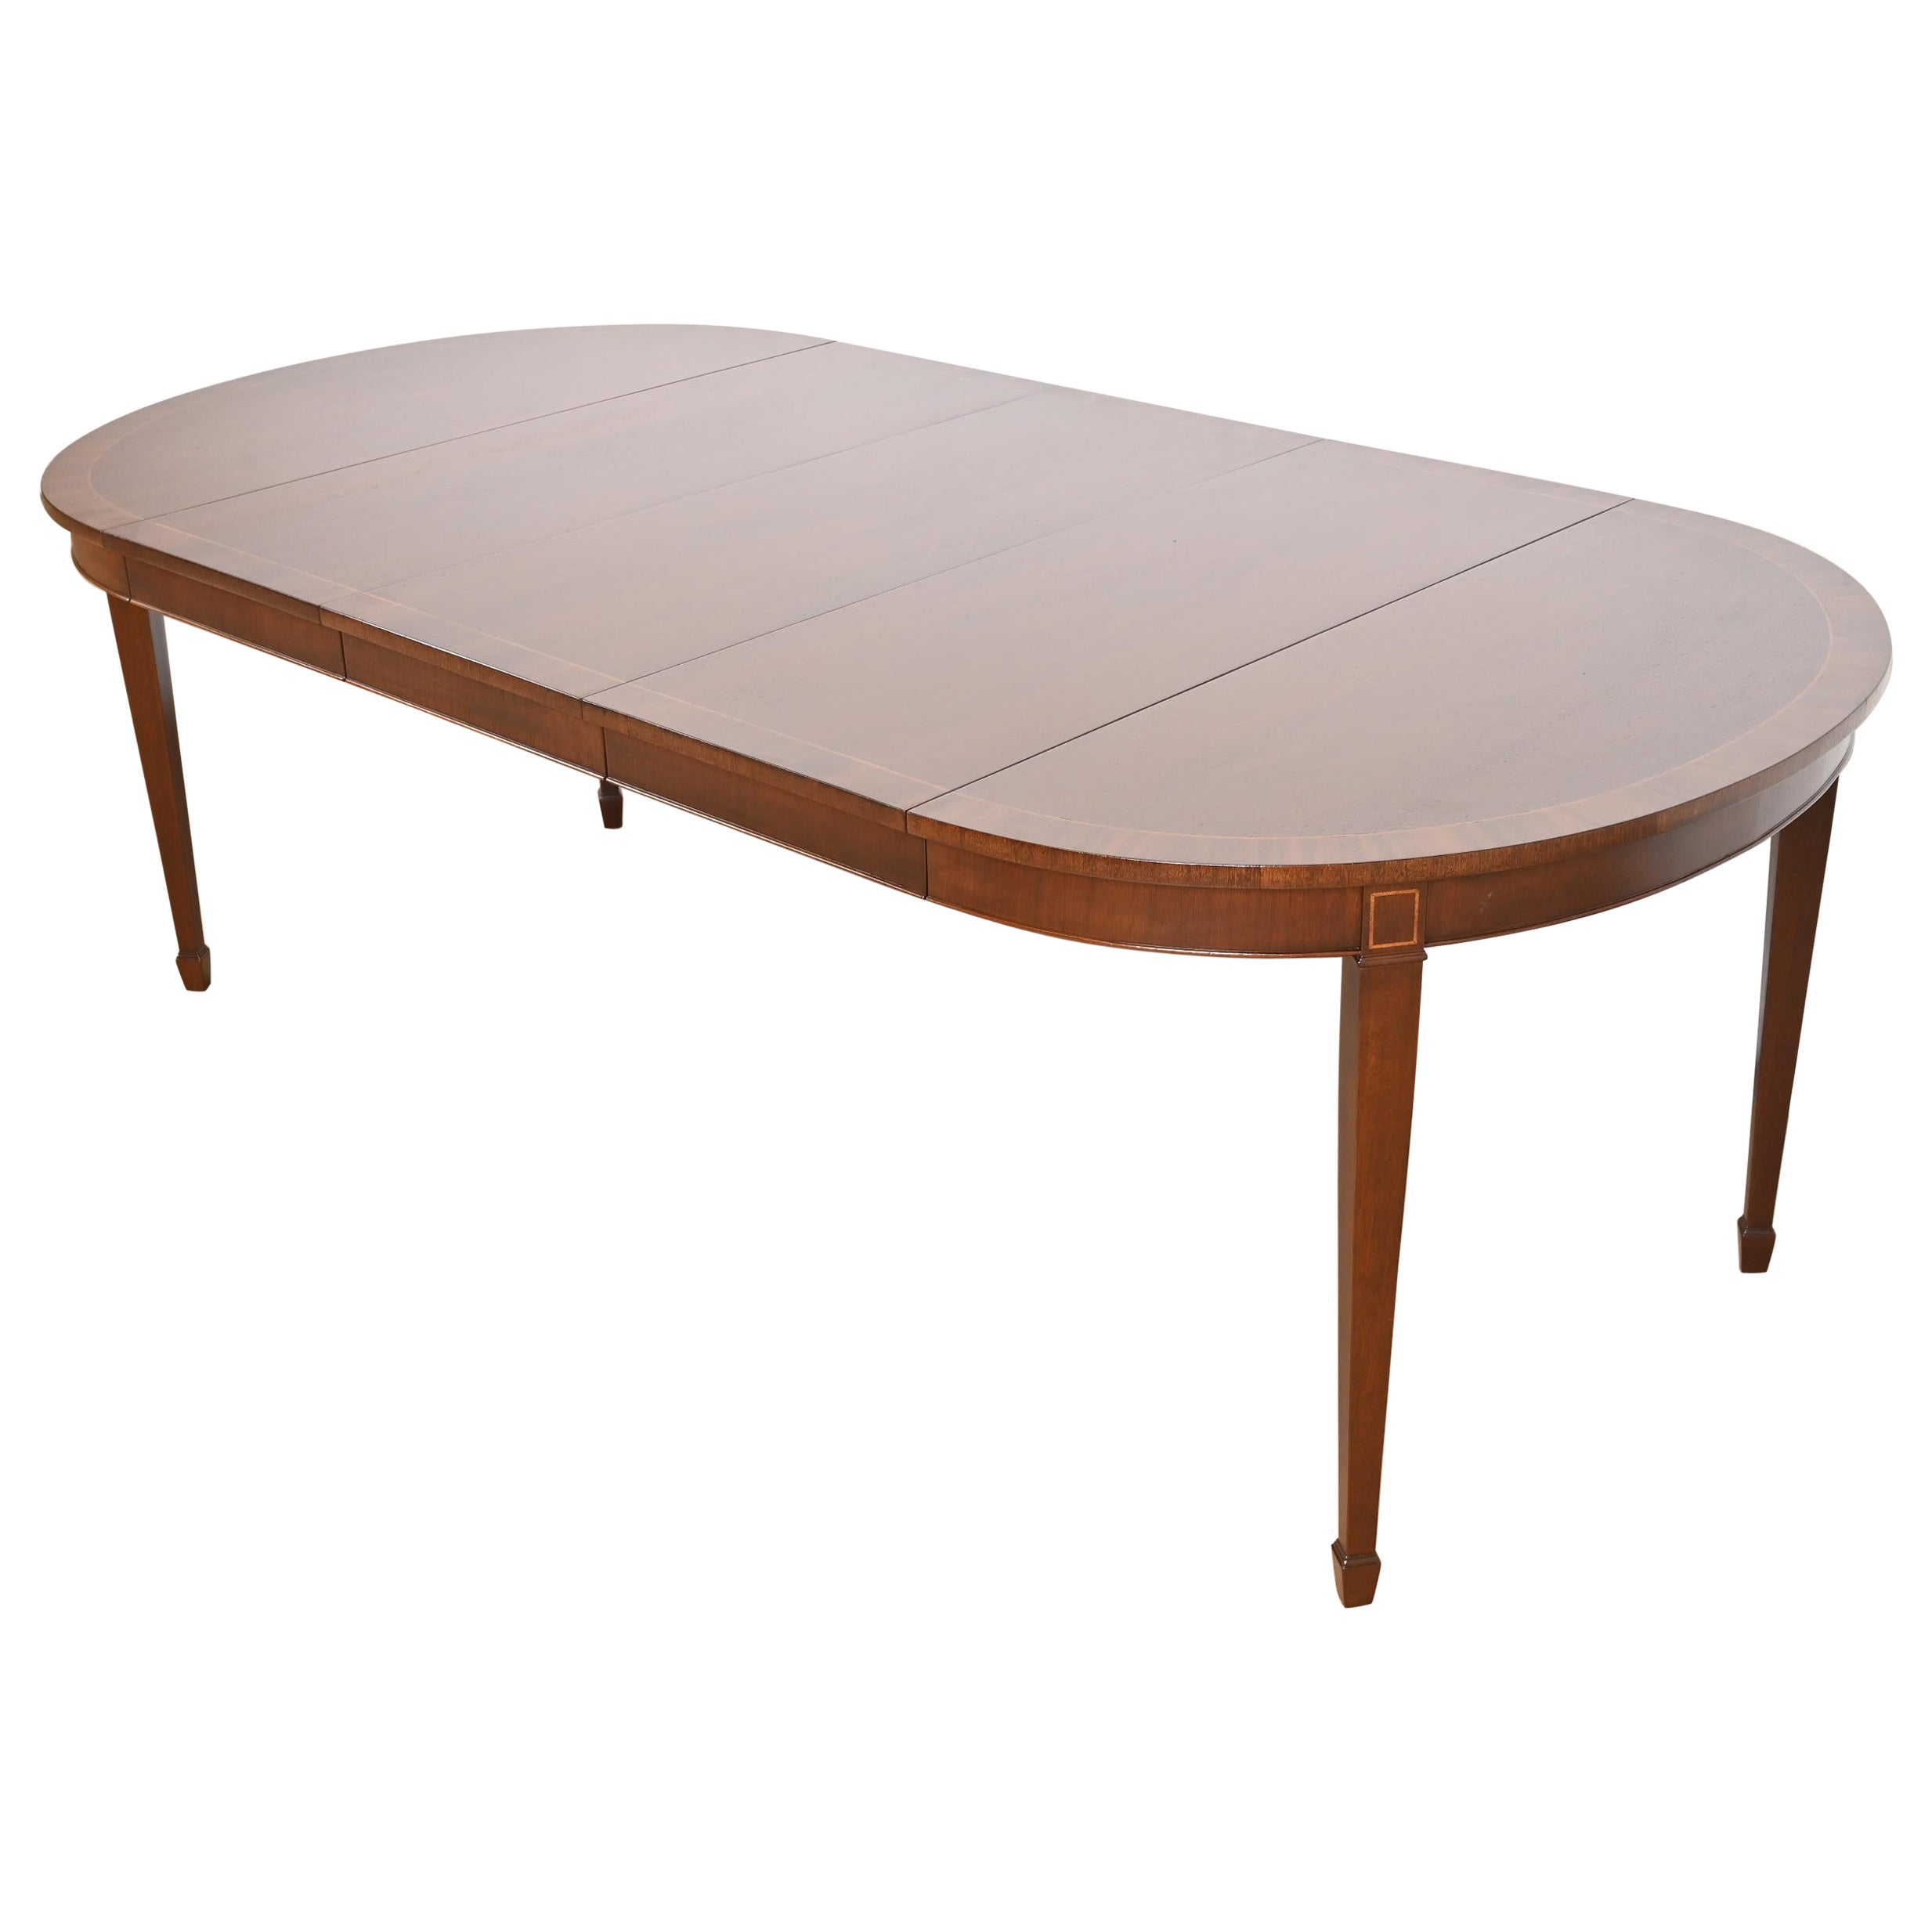 Kindel Furniture Federal Banded Mahogany Extension Dining Table, Refinished